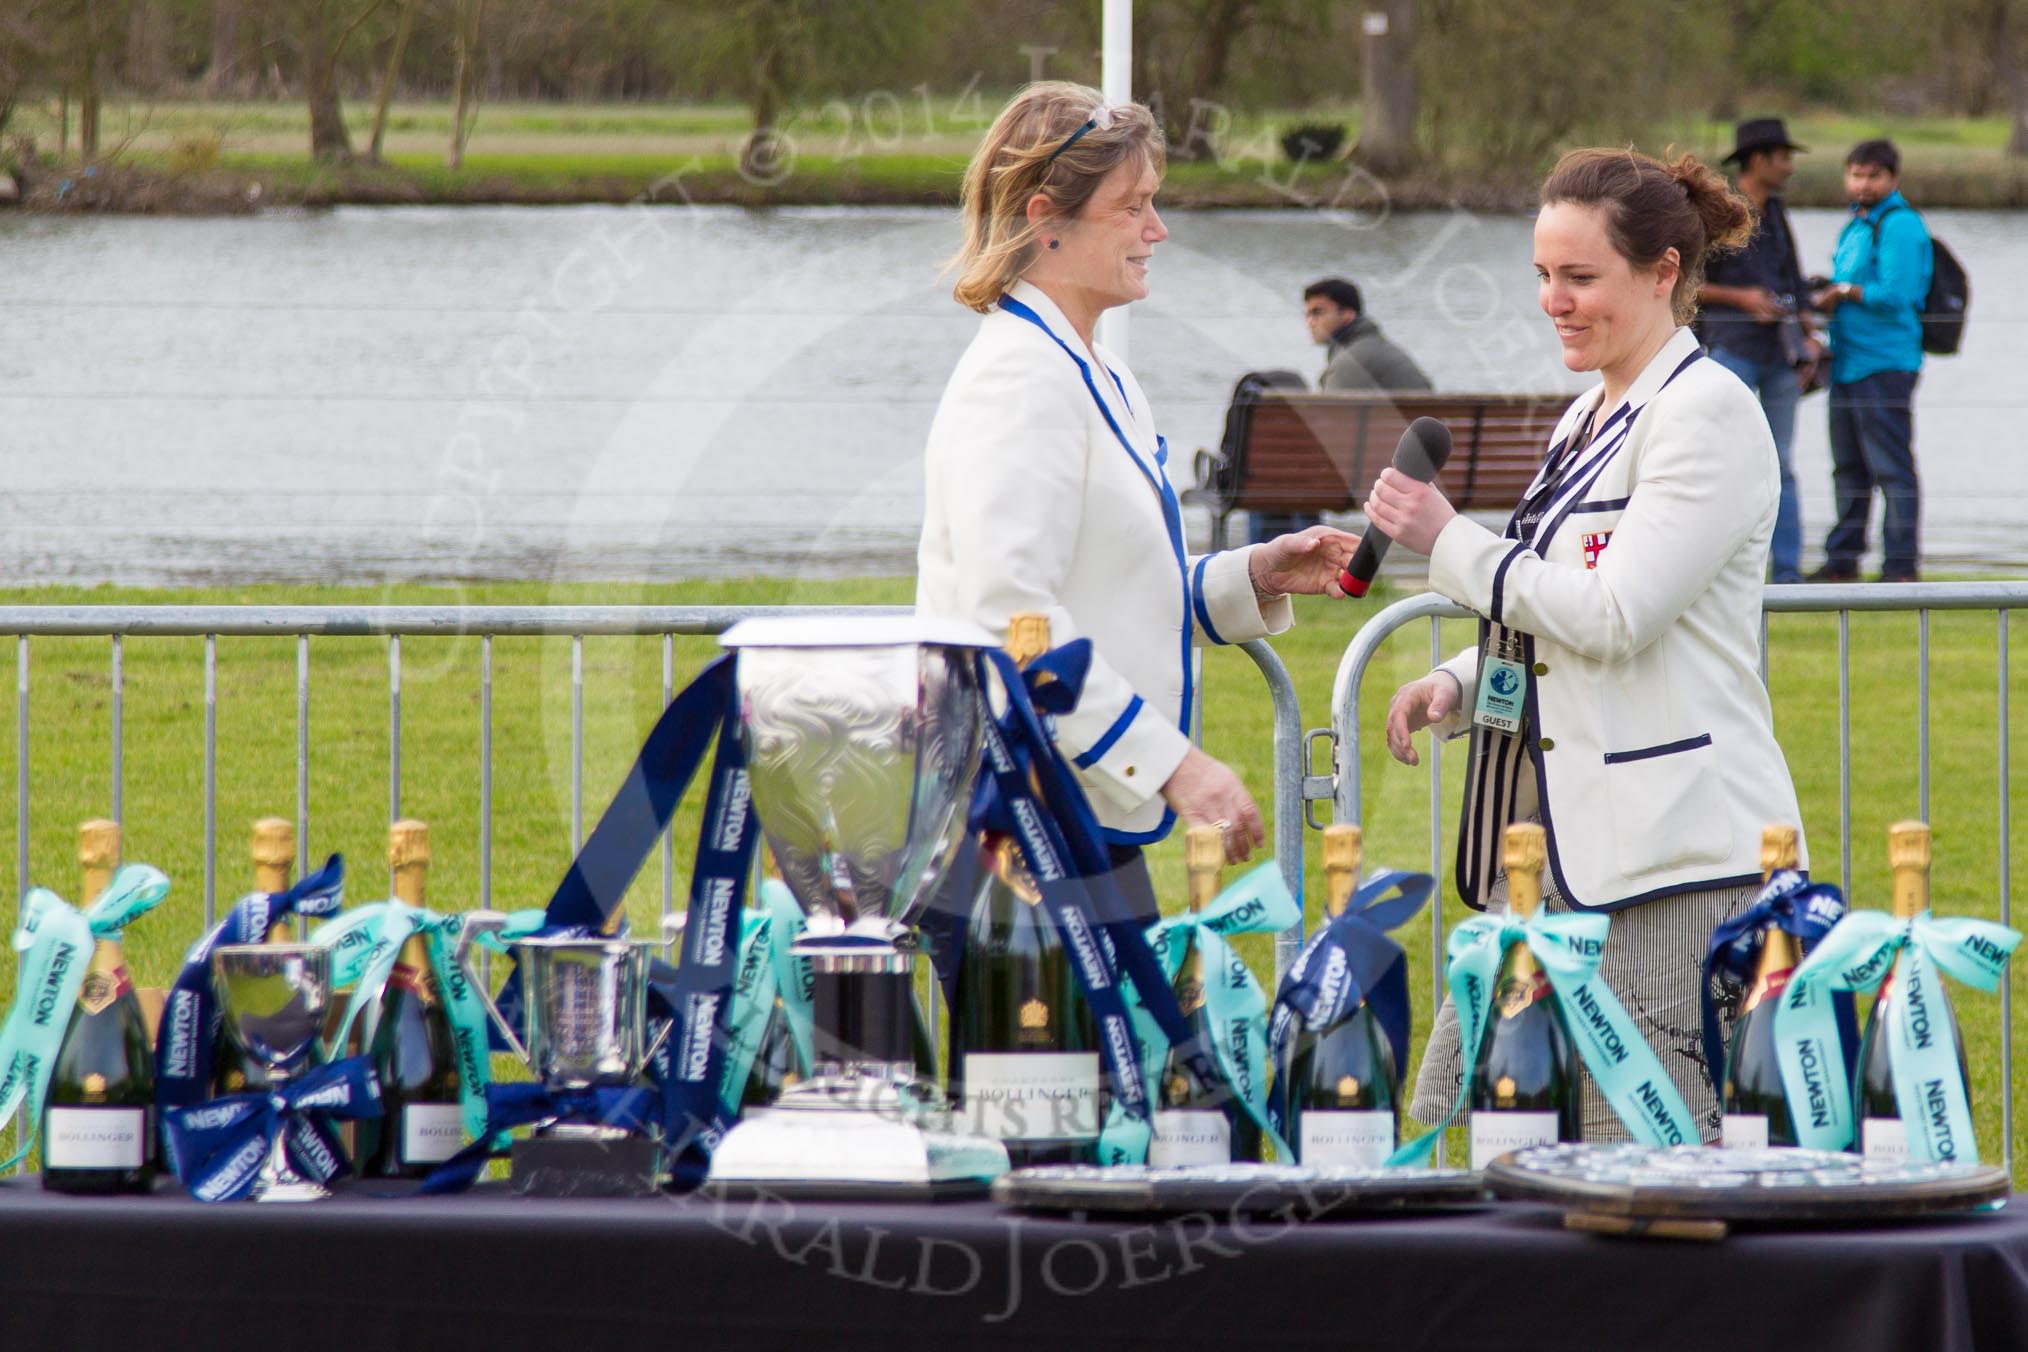 The Women's Boat Race and Henley Boat Races 2014: Judith Behan, head of the Henley Boat Races Organising Committee, handing over the microphone to Sophie Hosking MBE..
River Thames,
Henley-on-Thames,
Buckinghamshire,
United Kingdom,
on 30 March 2014 at 16:48, image #465